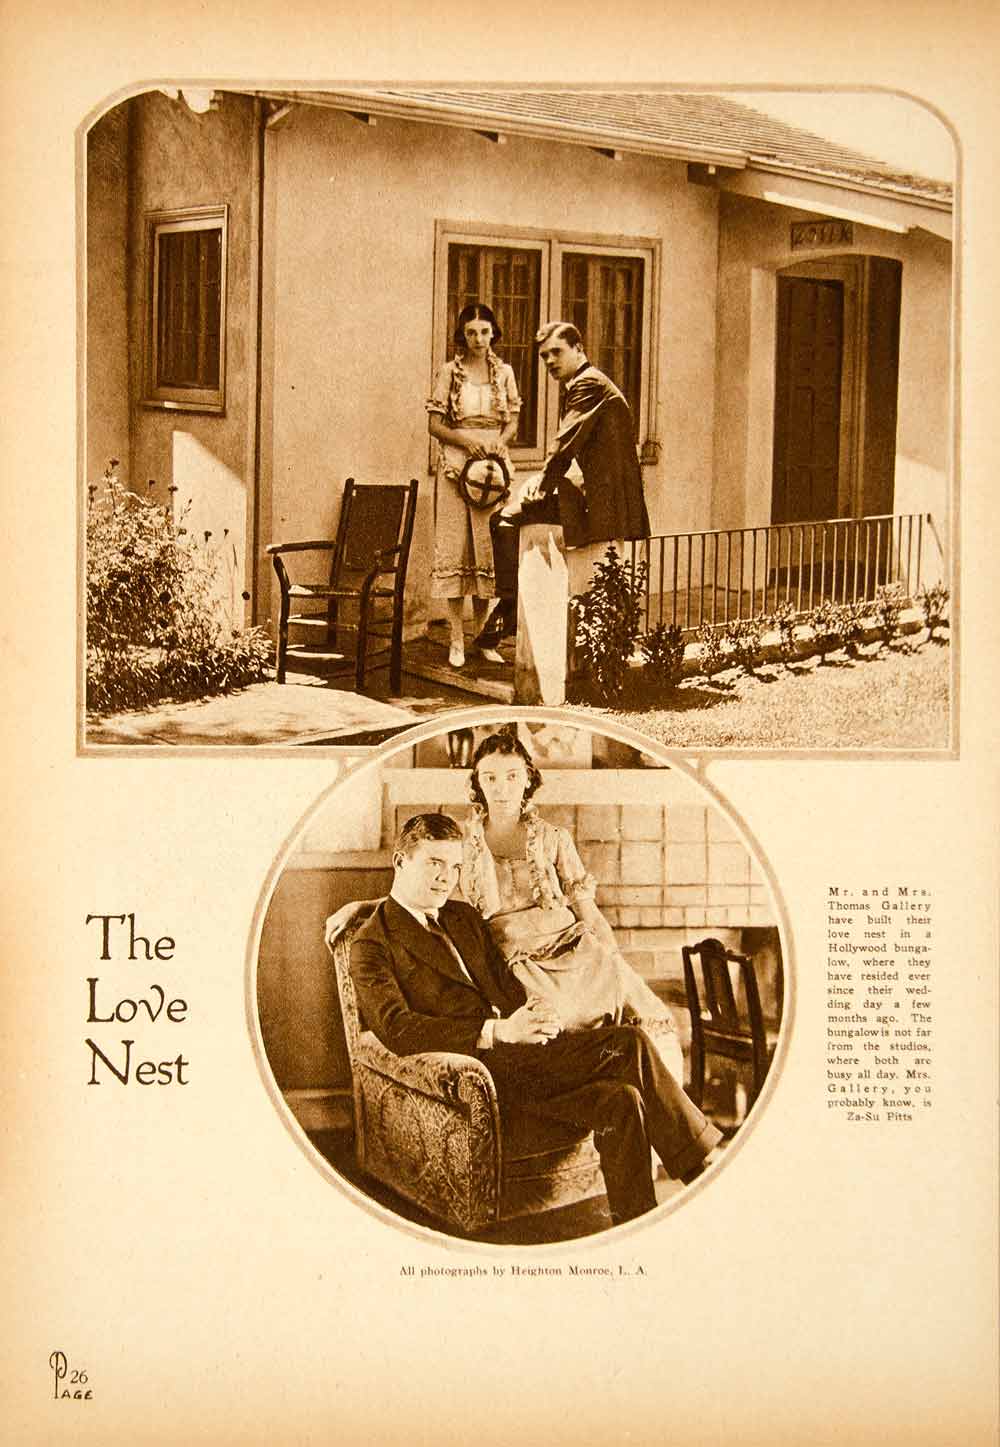 1921 Rotogravure Love Nest Thomas Gallery Hollywood Bungalow Za-Su Pitts YMP1